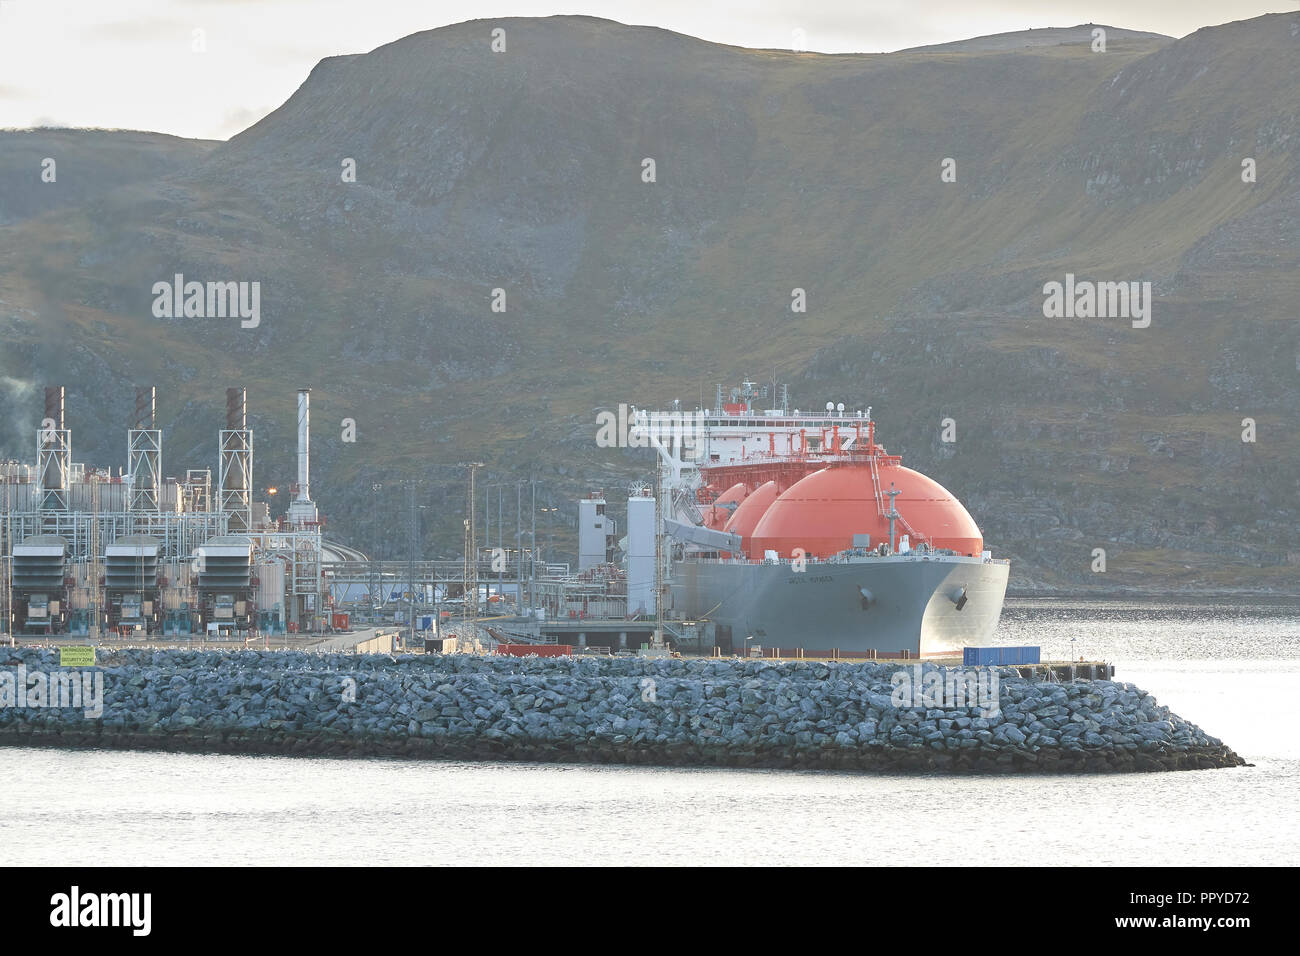 The Giant LNG (Liquified Natural Gas) Carrier, ARCTIC VOYAGER, Loading At The Melkøya LNG Processing Facility, Hammerfest, Norway. Stock Photo